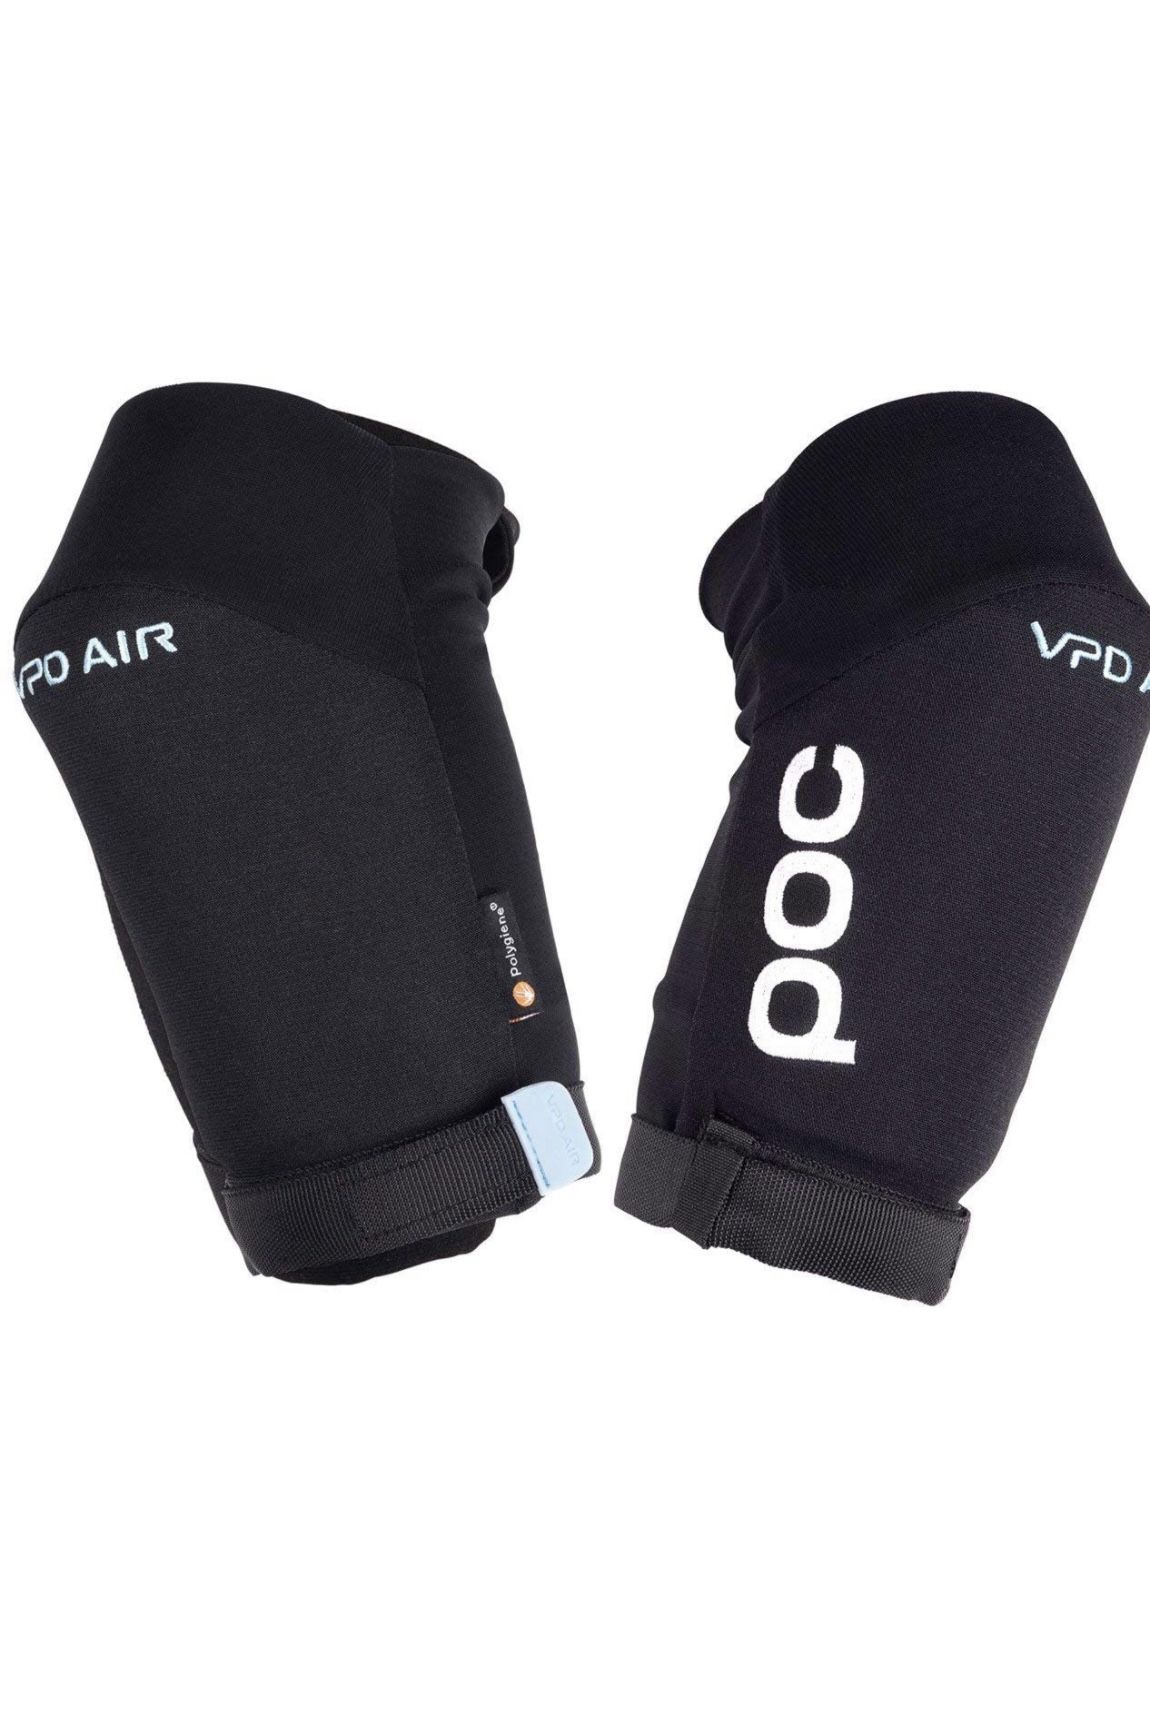 rand: POC 4.5 out of 5 stars  486 Reviews POC, Joint VPD Air Elbow Pads, Lightweight Mountain Biking